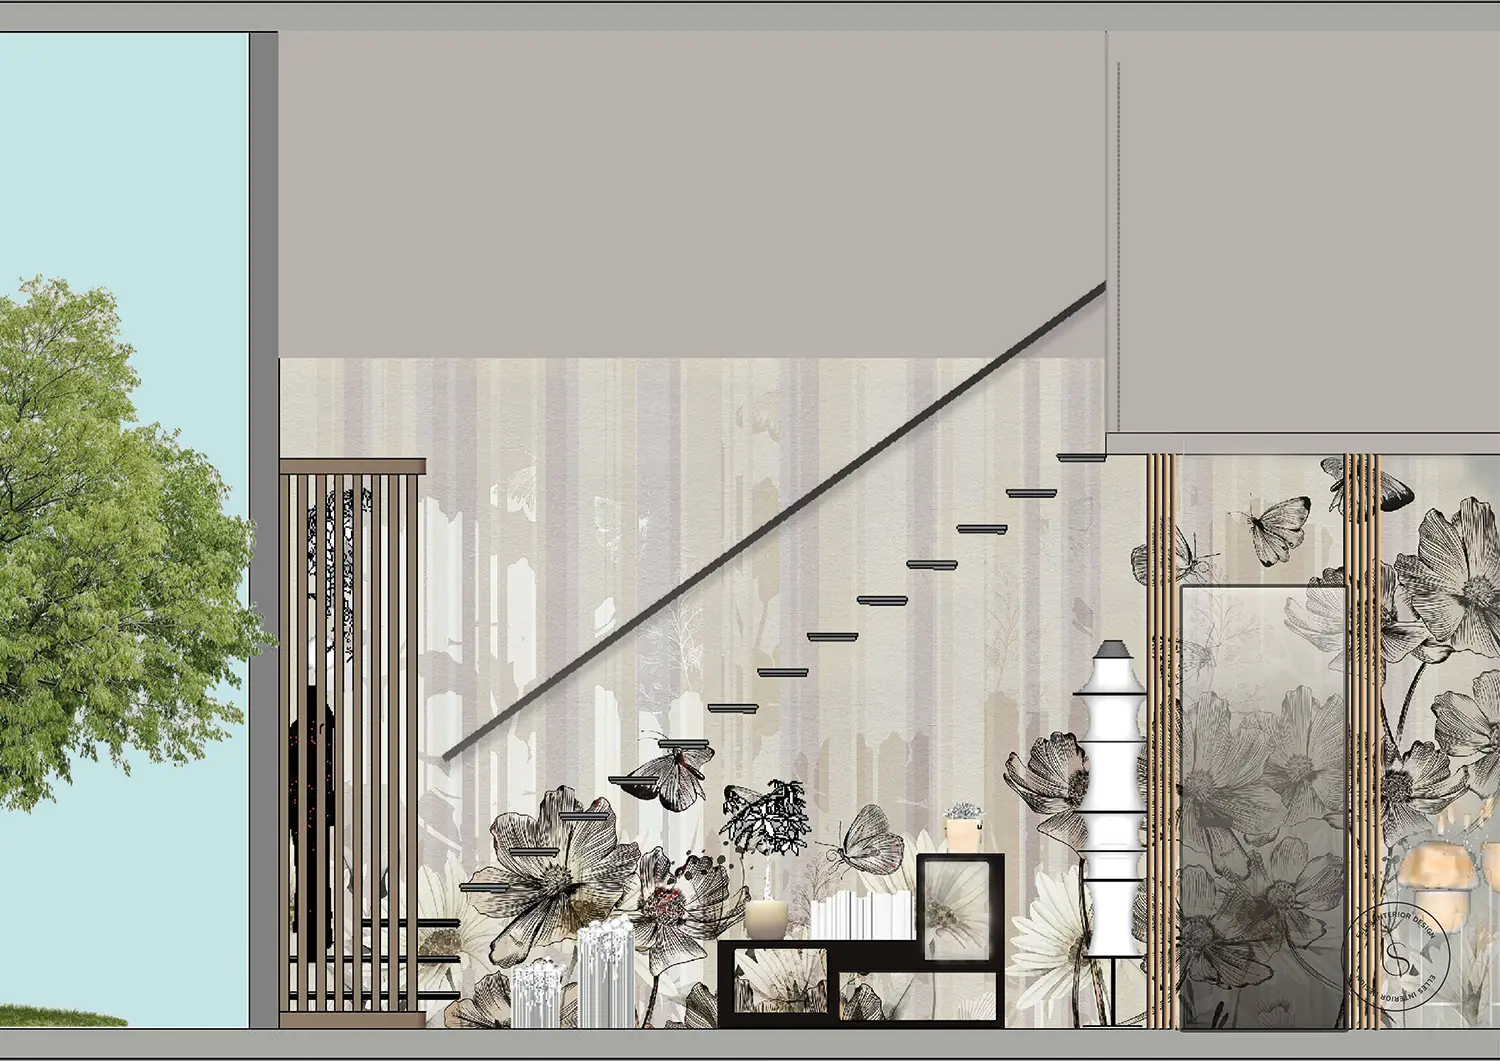 Visualisation of the staircase wall covered with floral wallpaper in warm and vivid tones; project carried out by the studio Elles Interior Design.